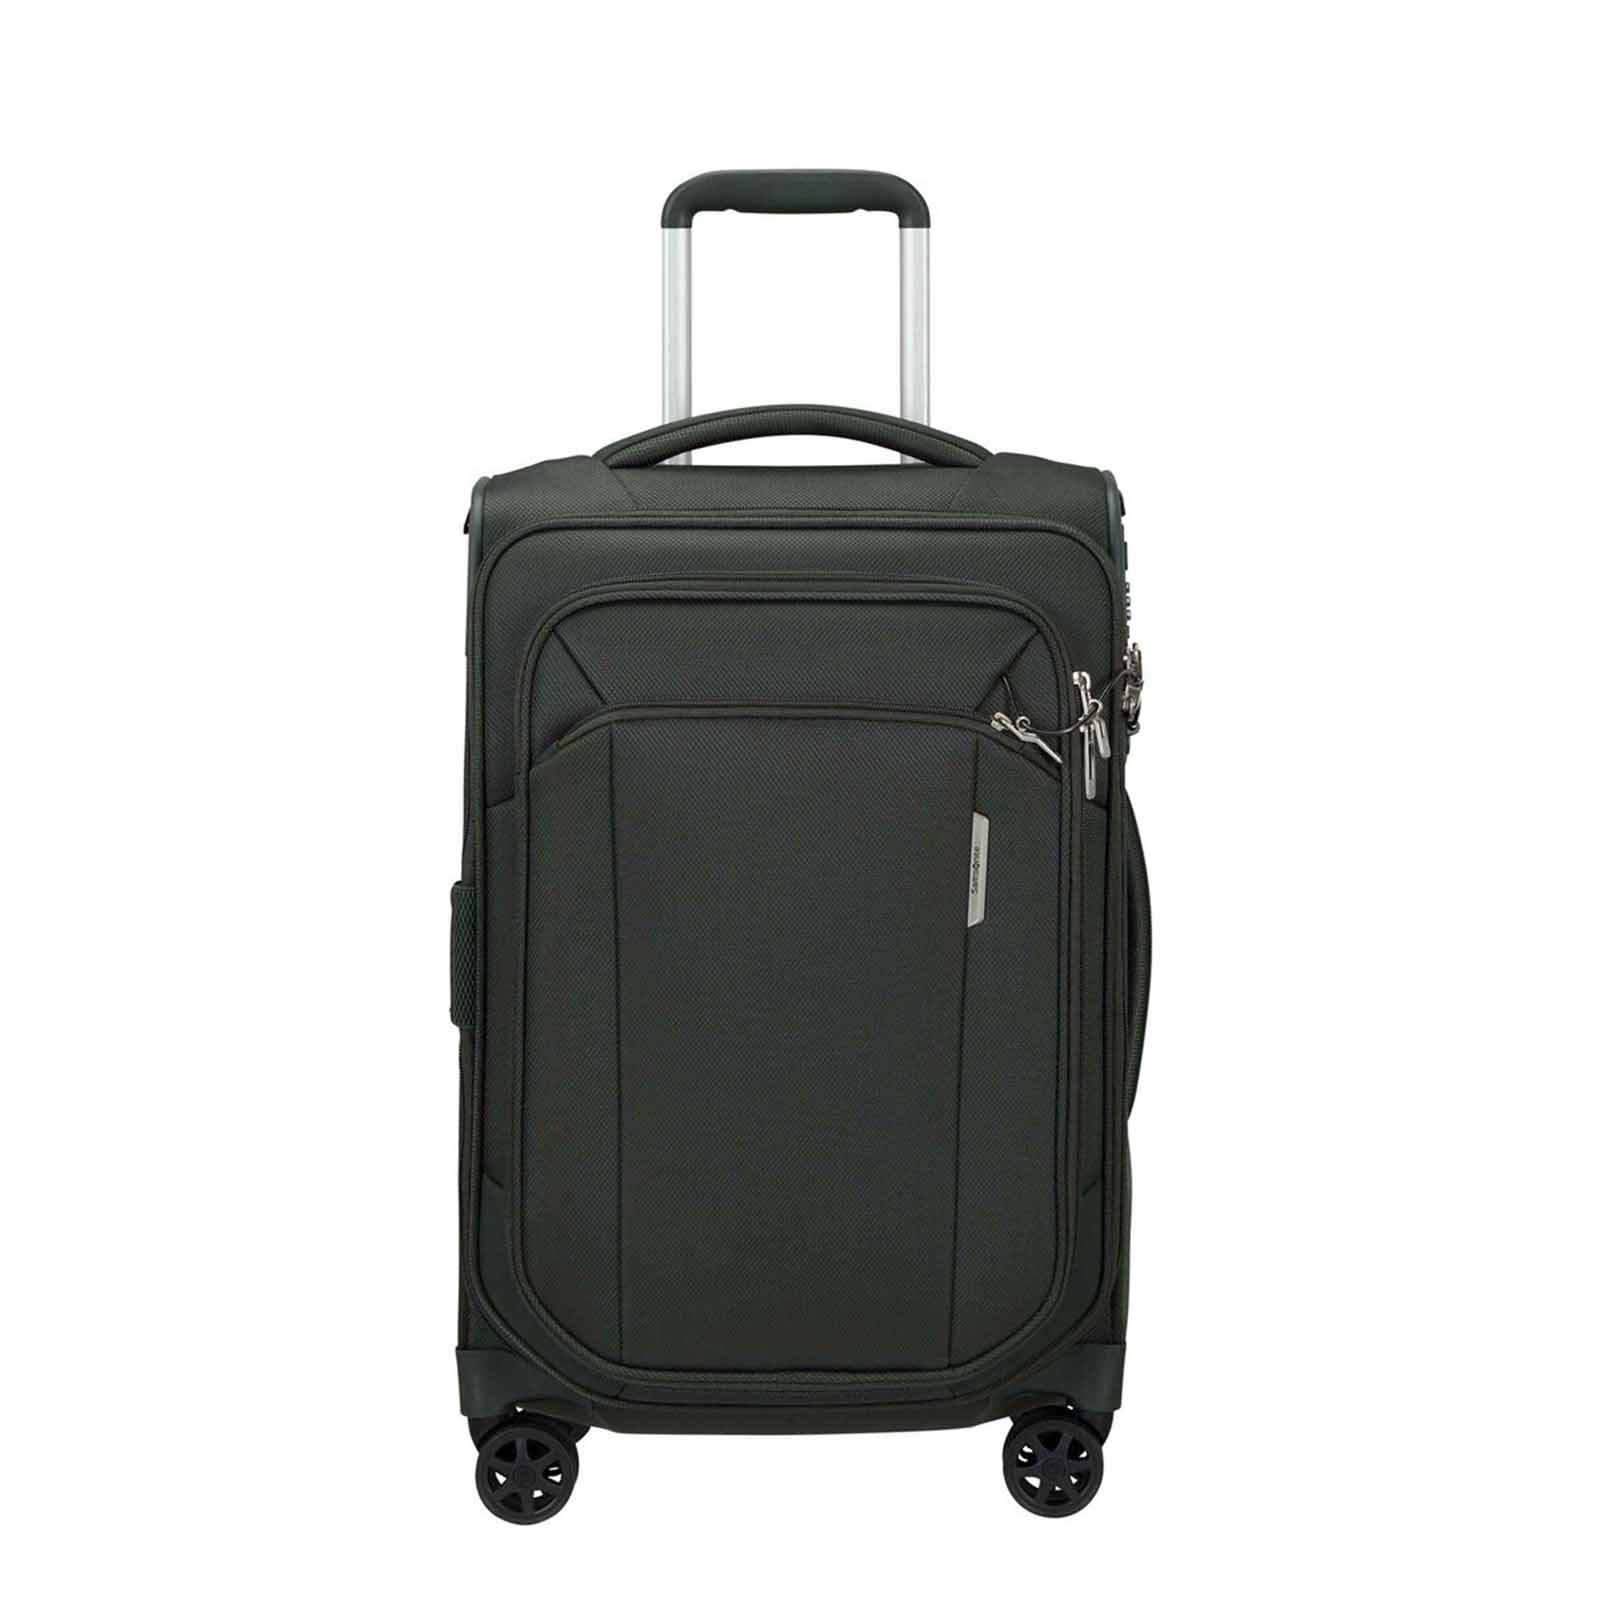 Samsonite-Respark-55cm-Carry-On-Suitcase-Forest-Green-Front